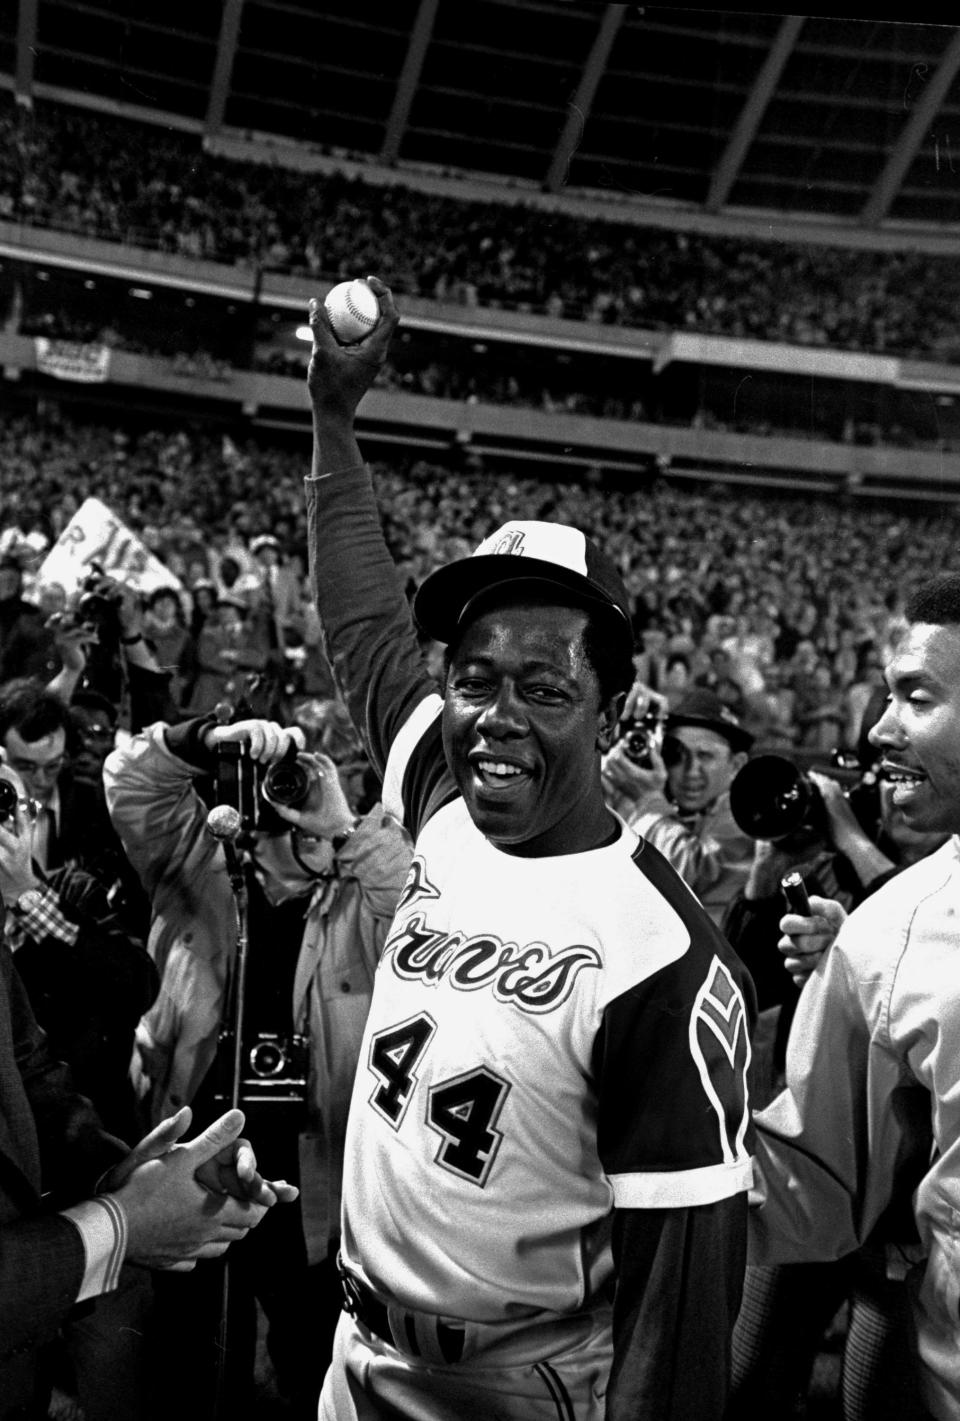 FILE - In this April 8, 1974 file photo, Atlanta Braves baseball player Hank Aaron holds the ball he hit for his 715th home run during a game against the Los Angeles Dodgers, in Atlanta. The 40th anniversary of Aaron's 715th home run finds the Hall of Famer, now 80, coping with his recovery from hip surgery. The anniversary of his famous homer on April 8, 1974 will be celebrated before the Braves' home opener against the Mets on Tuesday night. (AP Photo/Bob Daugherty, File)